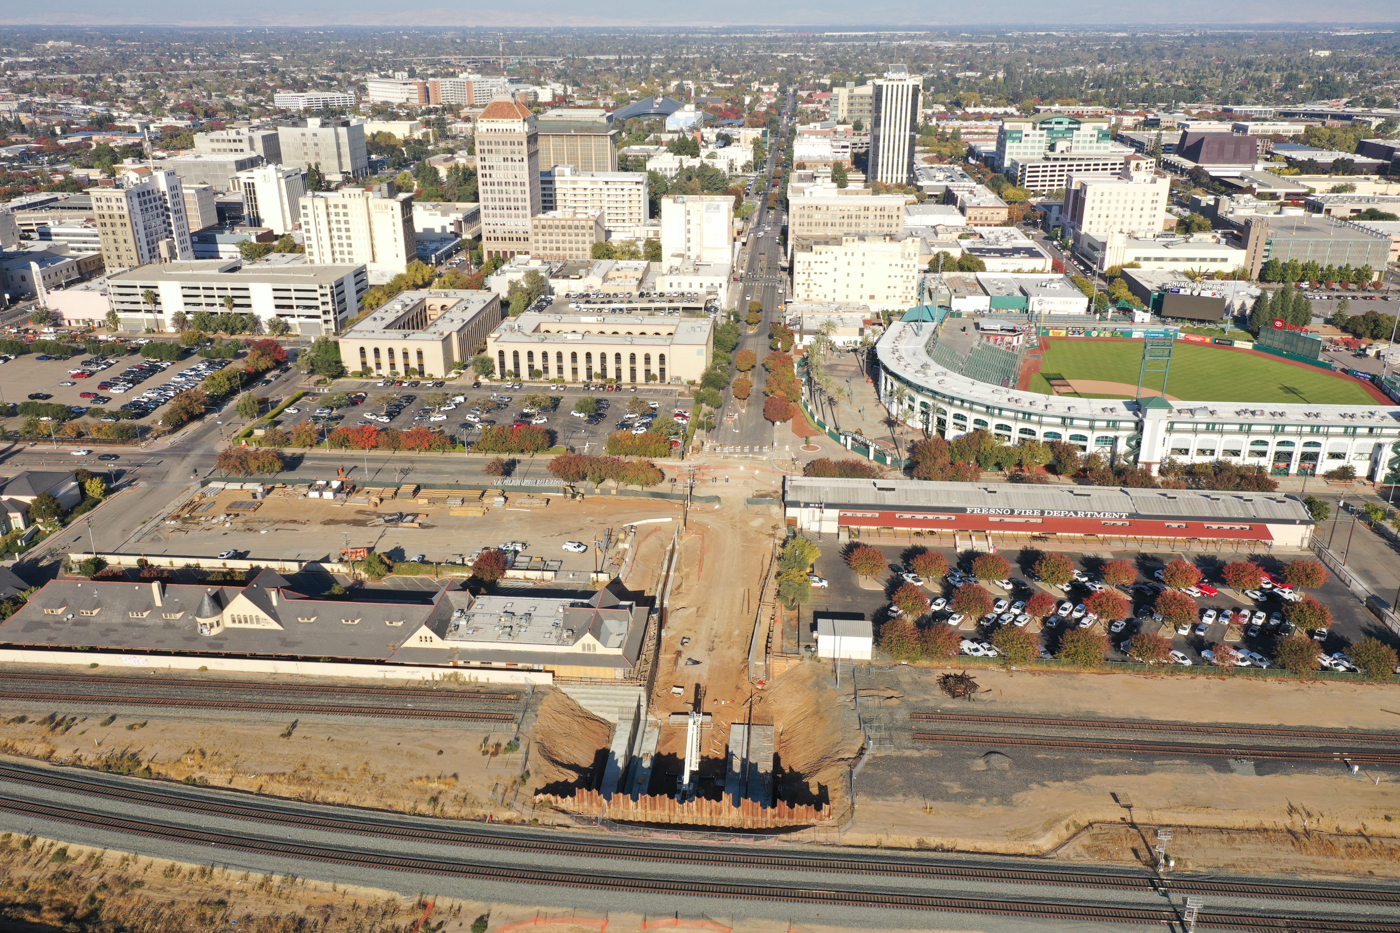 Tulare Street Undercrossing (drone view)